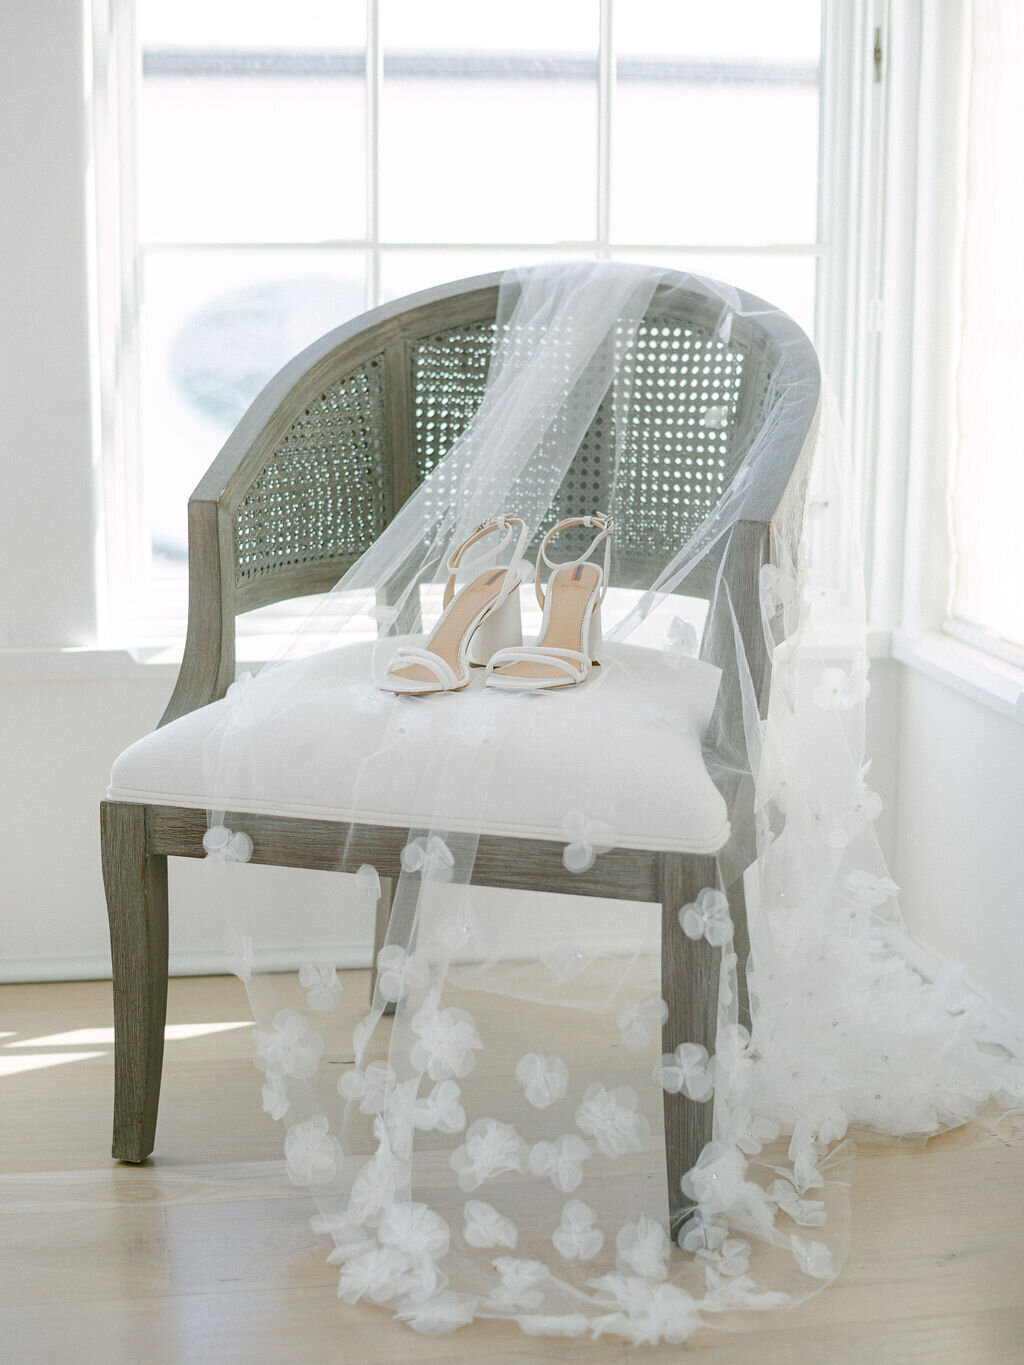 Chair with wedding shows and veil for alys beach wedding